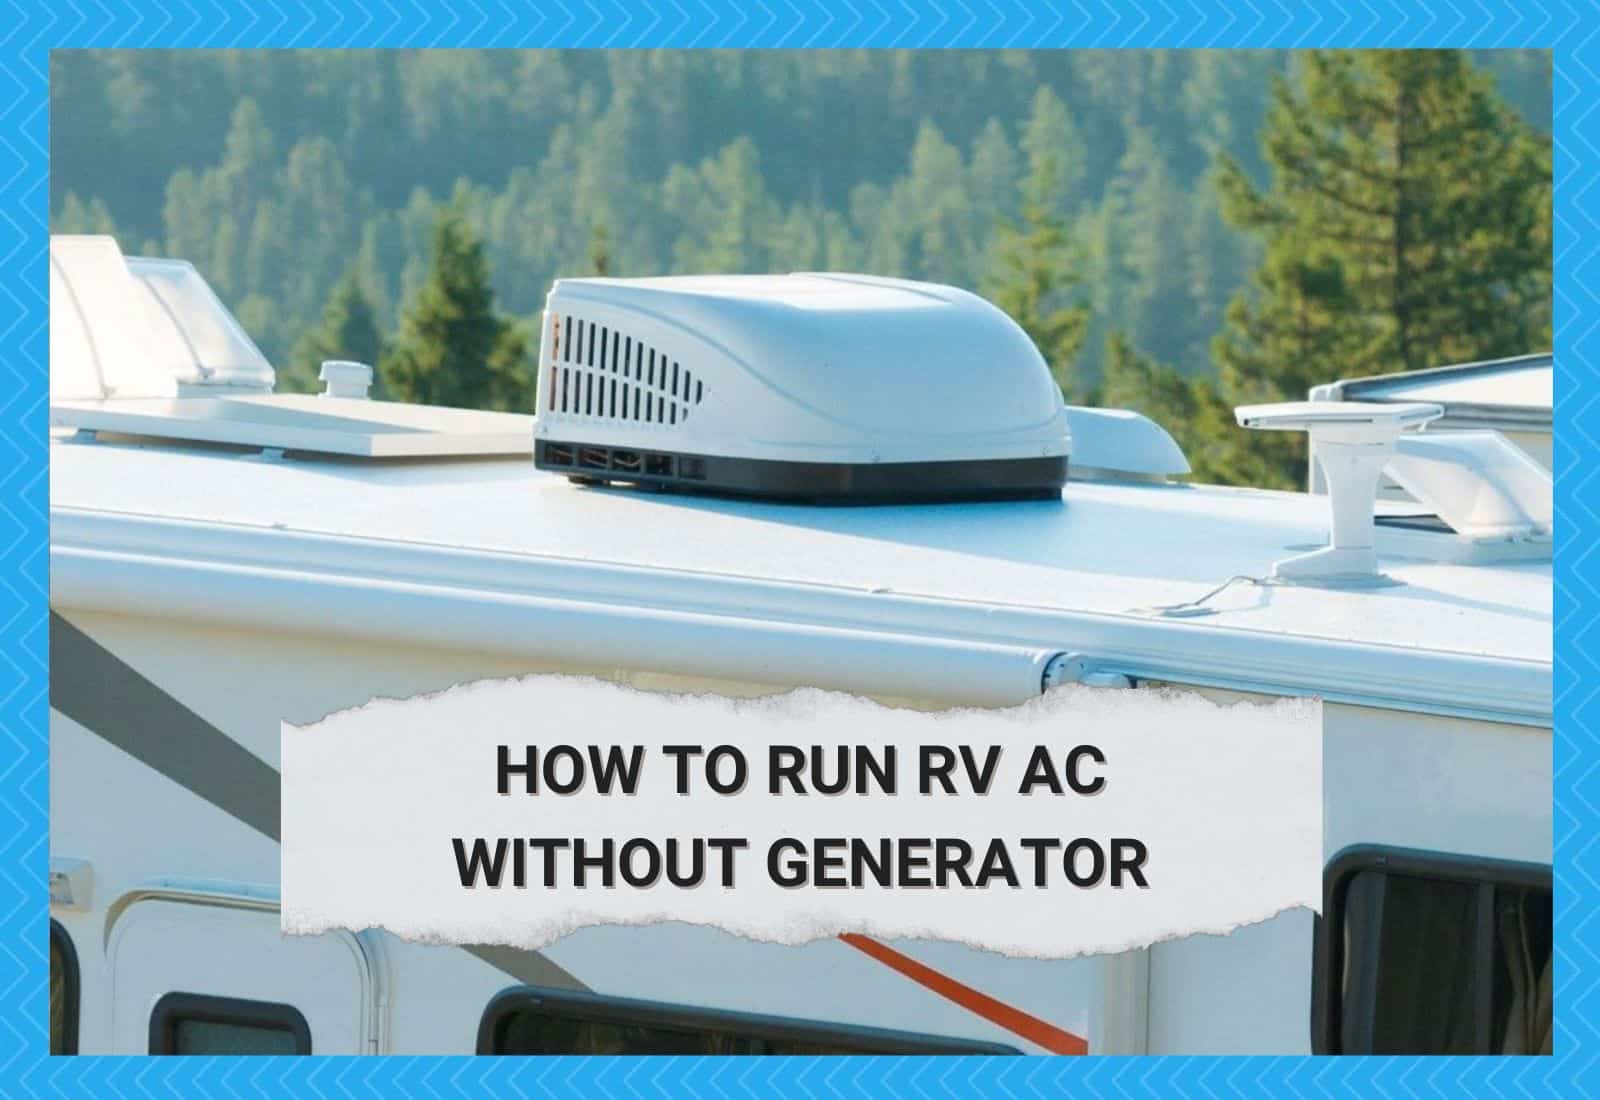 How To Run RV AC Without Generator